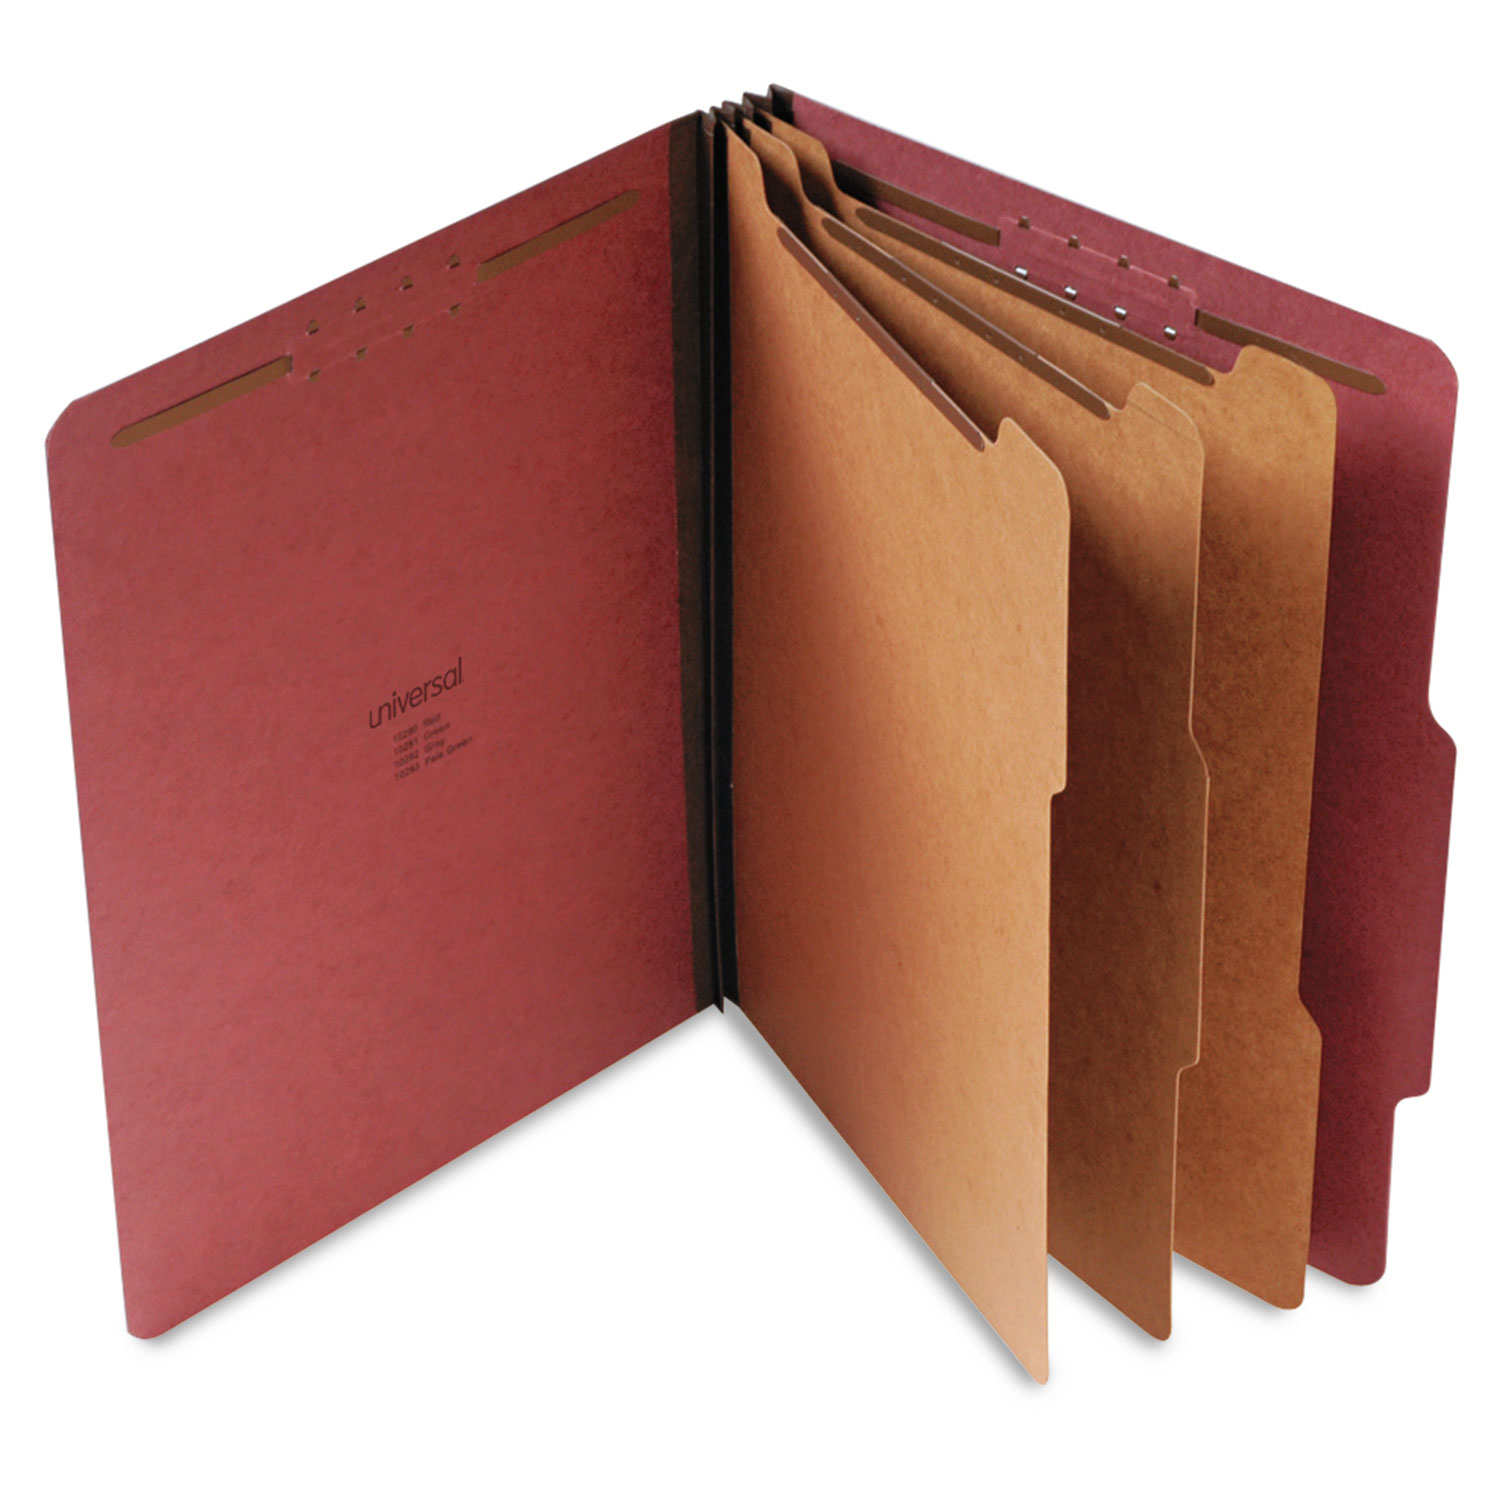  Universal UNV10290 Eight-Section Pressboard Classification Folders, 3 Dividers, Letter Size, Red, 10/Box (UNV10290) 